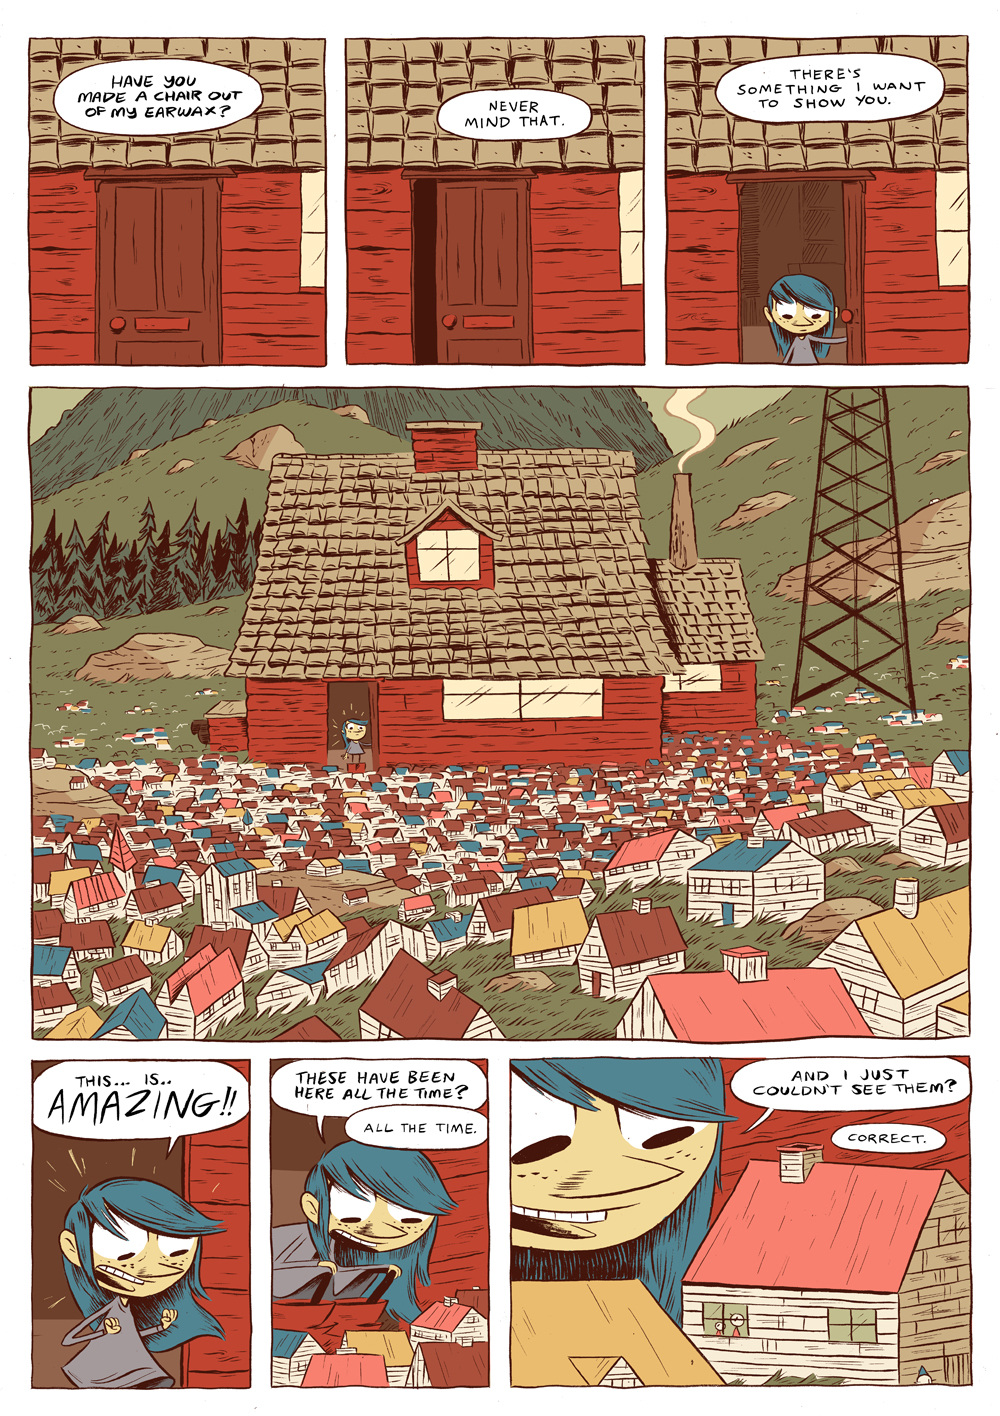 Hilda and the Midnight Giant review